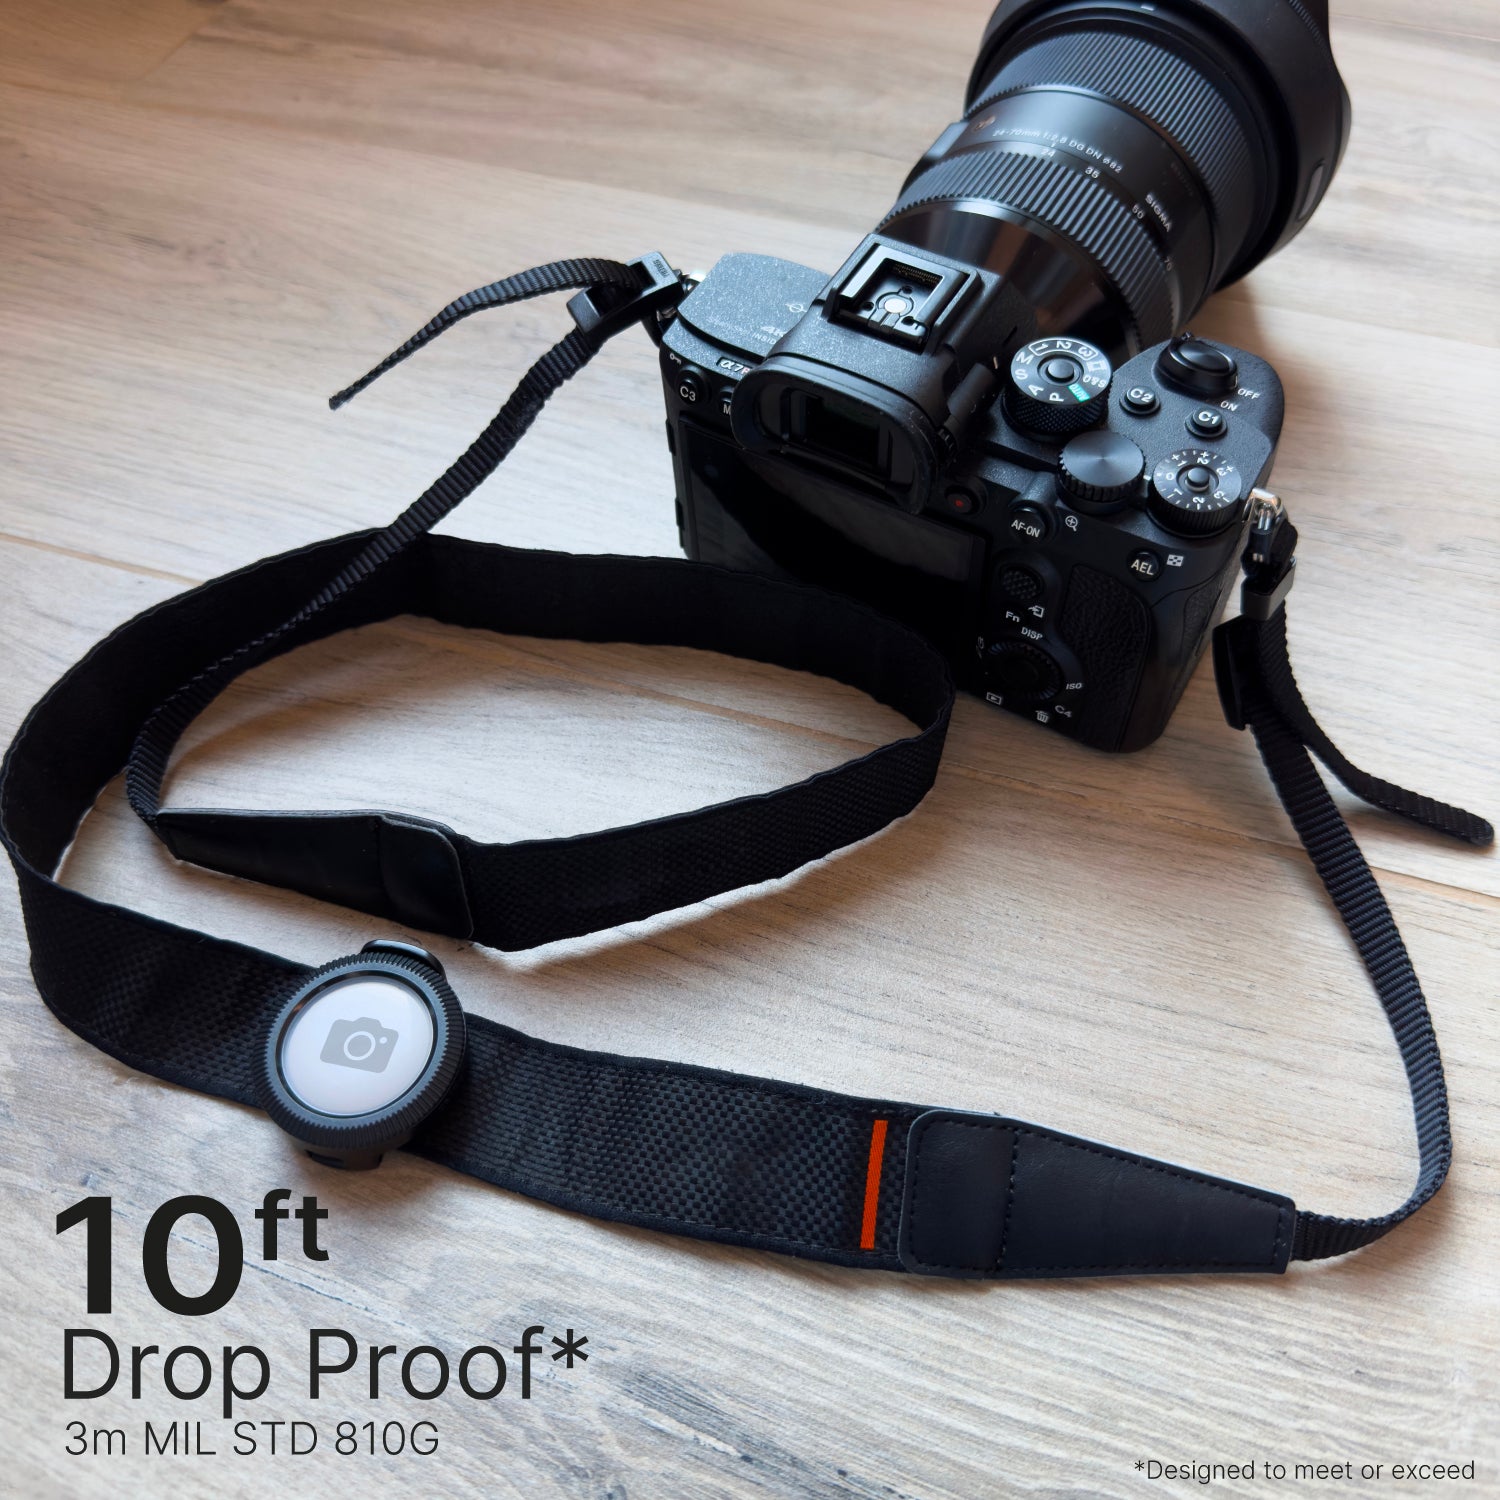 Catalyst total protection clip it Airtag clipped to camera Text reads 10ft drop proof 3m MIL STD 810g